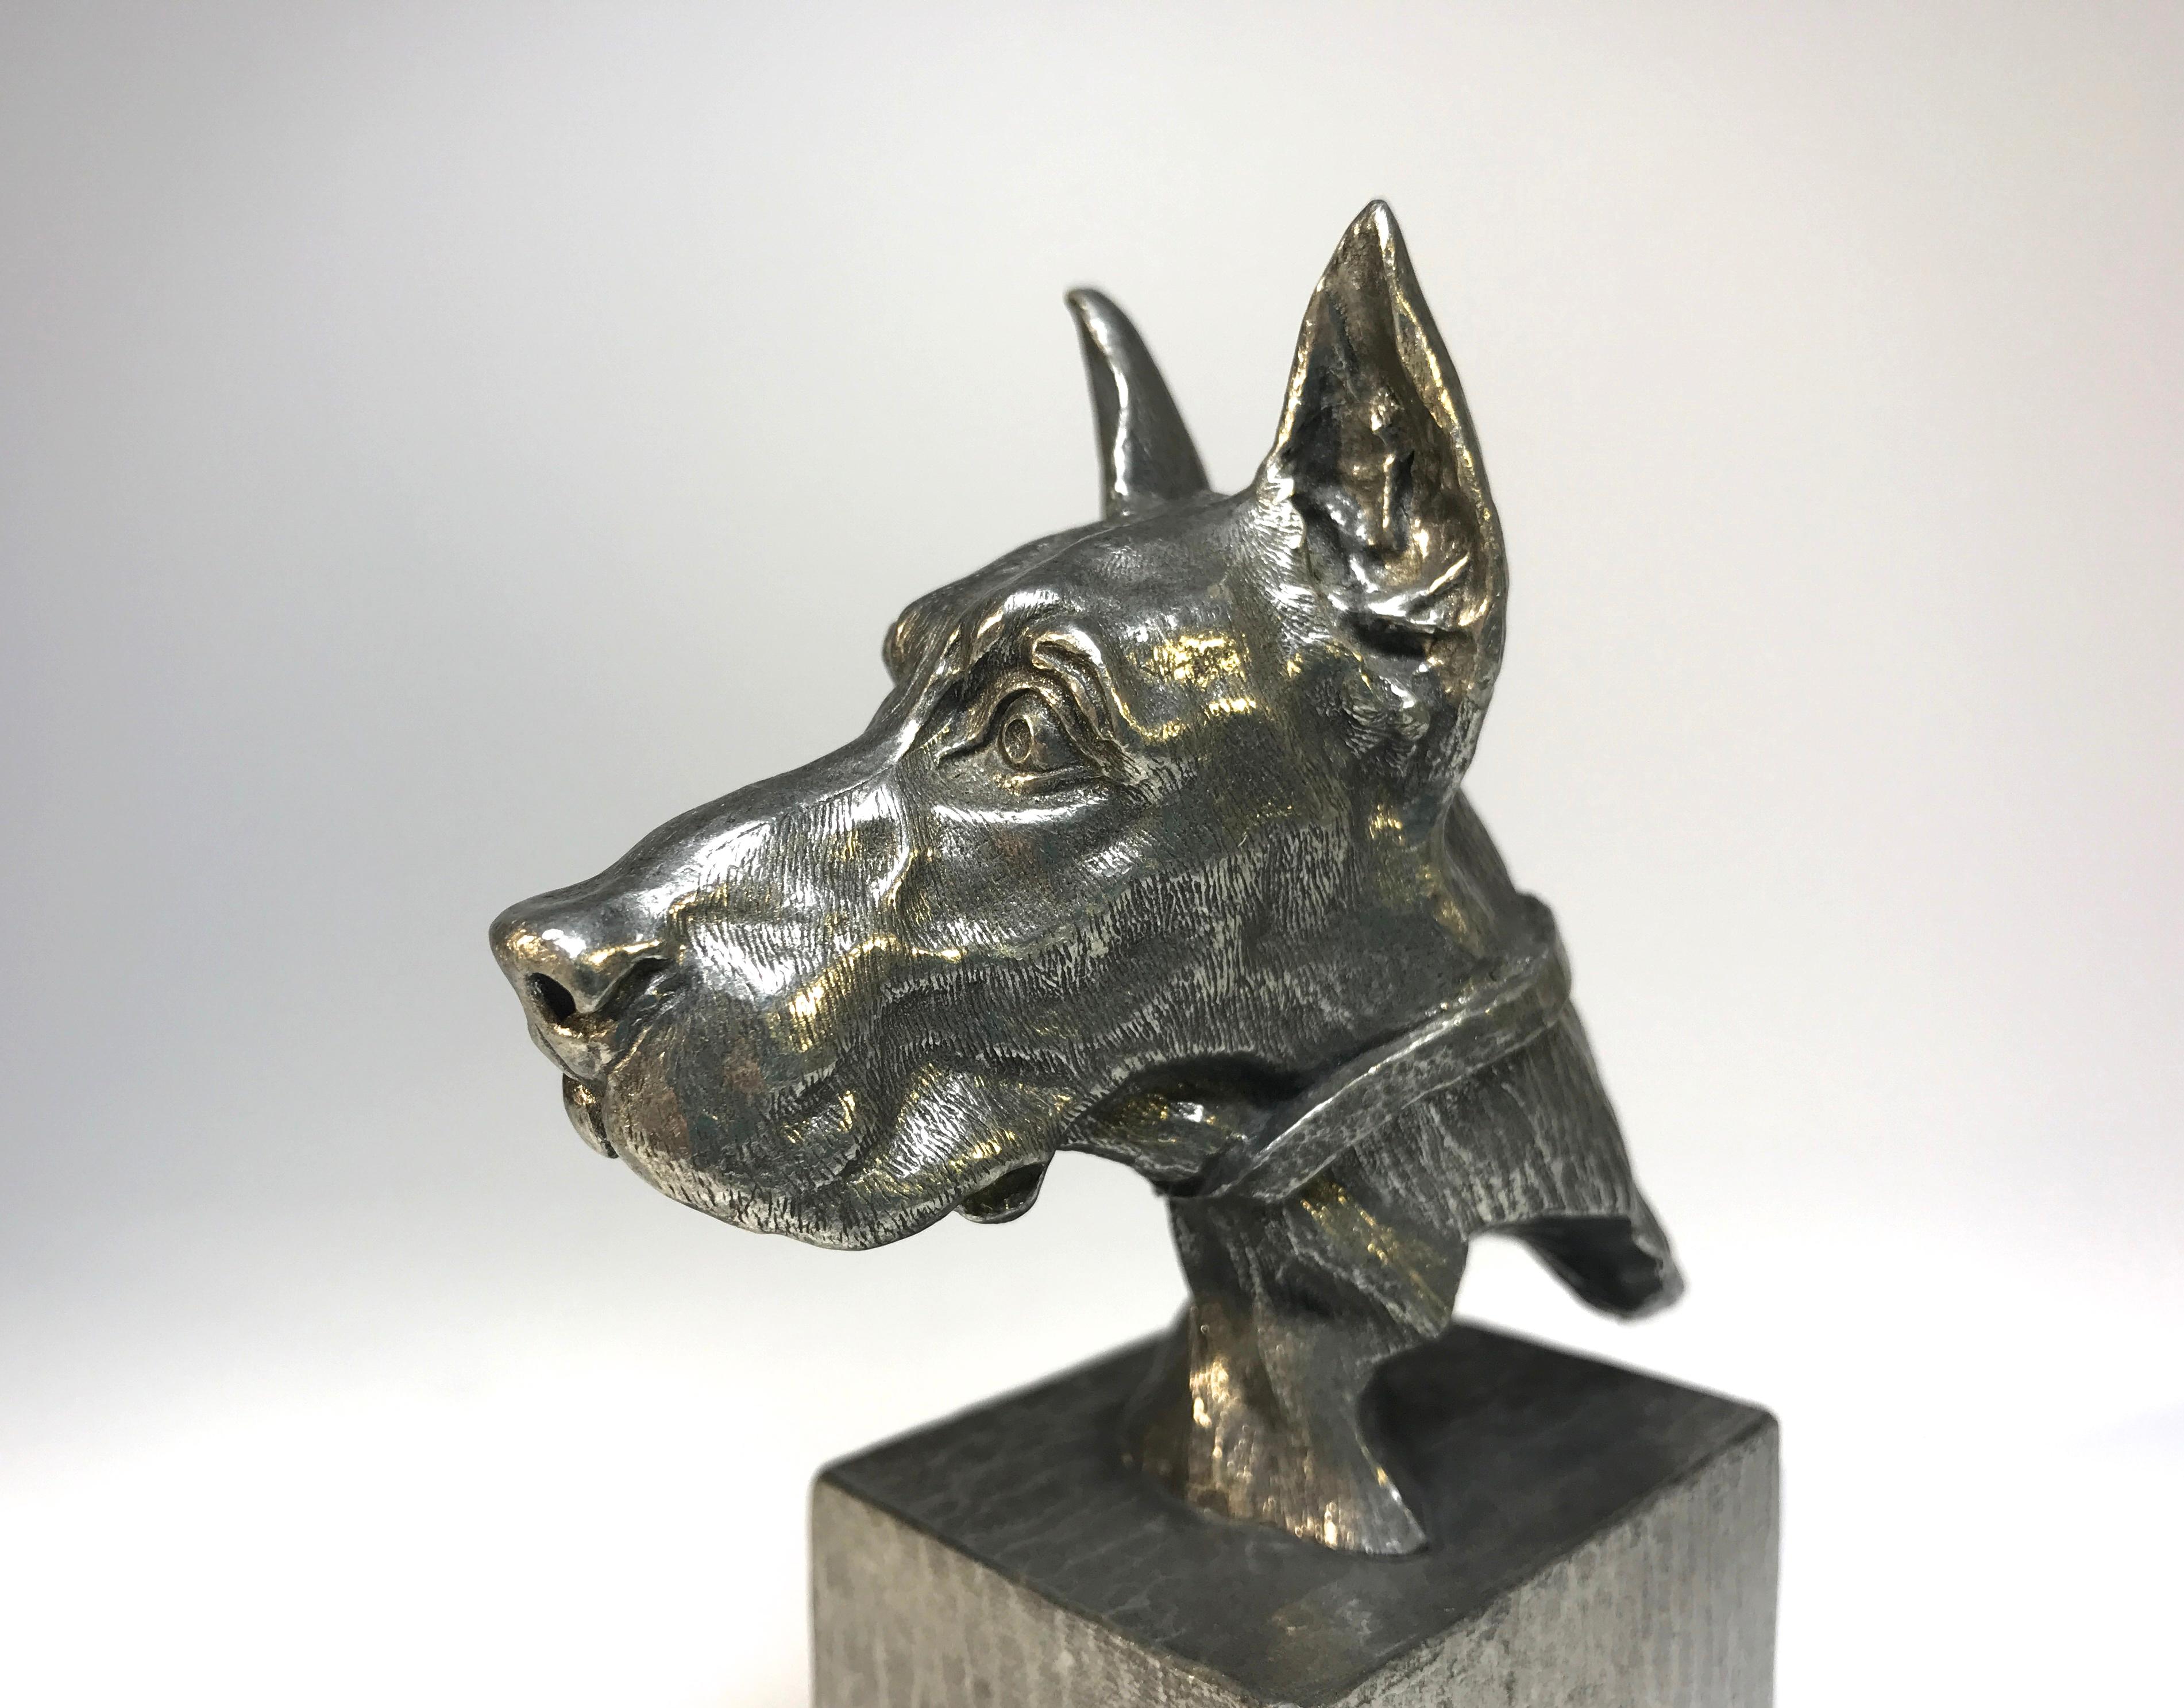 Superbly cast vintage pewter Great Dane bust midcentury paperweight 
The fine detailing on this pedigree piece makes for a super desk accessory
Measures: Height 3.75 inch, width 1.5 inch, depth 1.75 inch
In excellent condition.
 